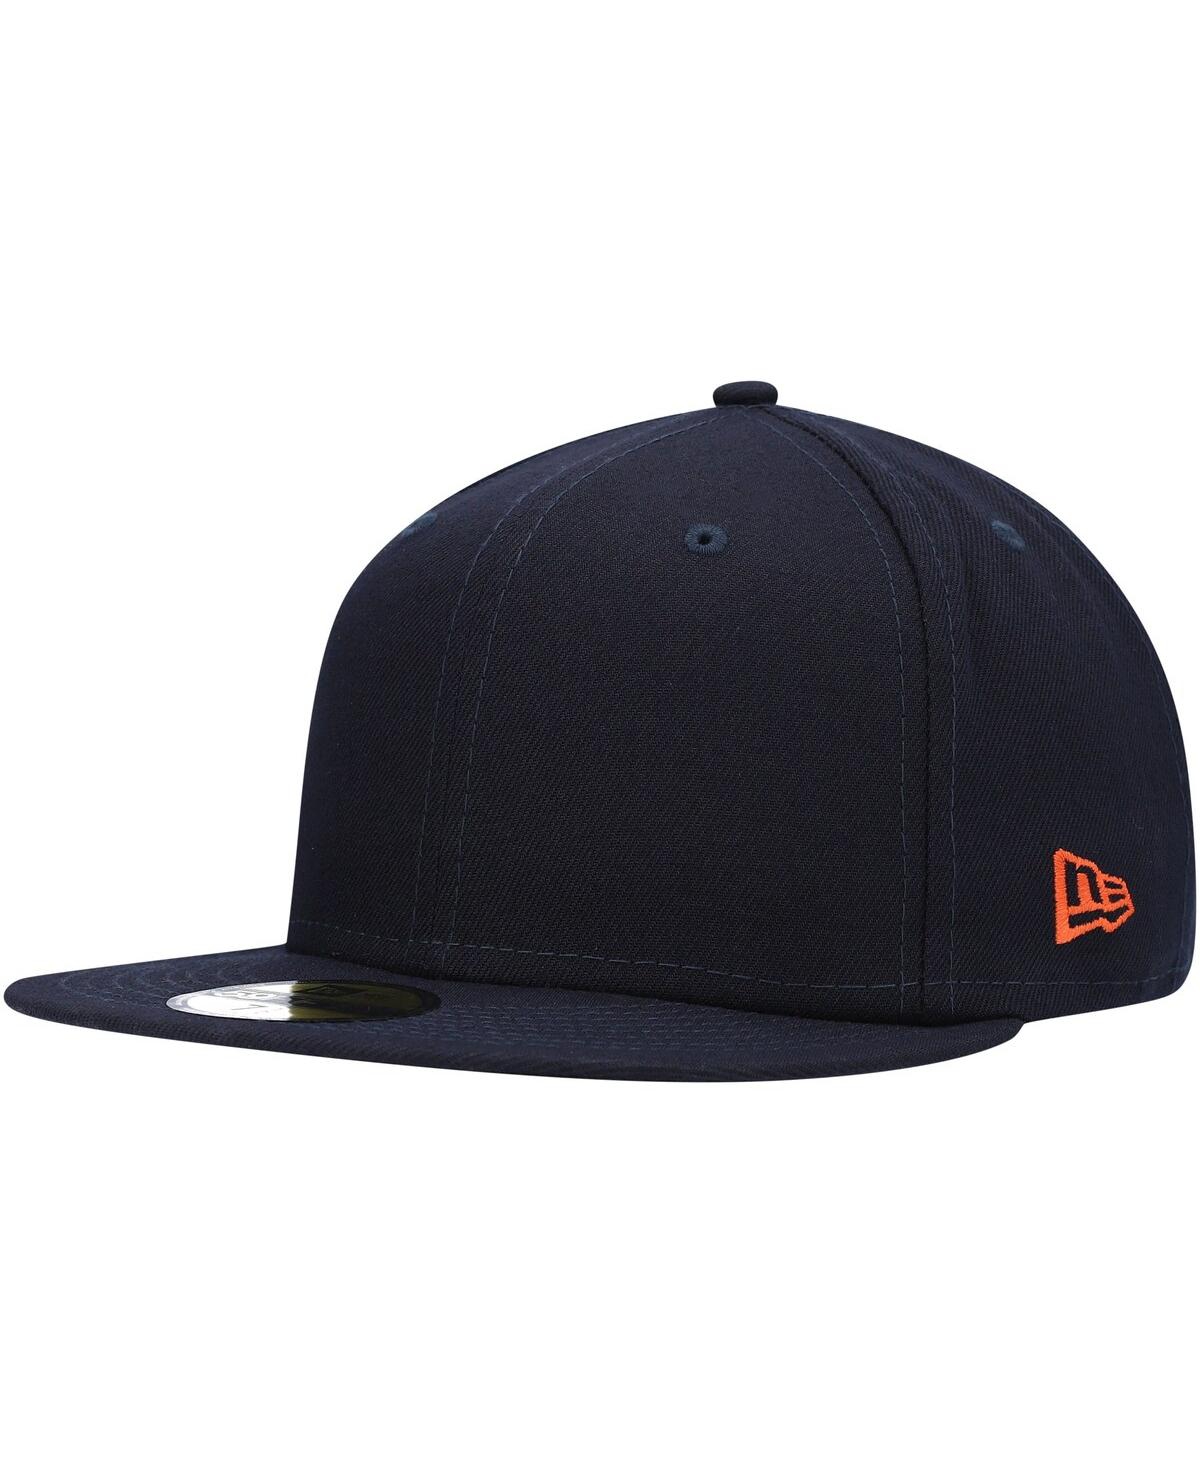 Shop New Era Men's  Navy San Francisco Giants Cooperstown Collection Turn Back The Clock Sea Lions 59fifty